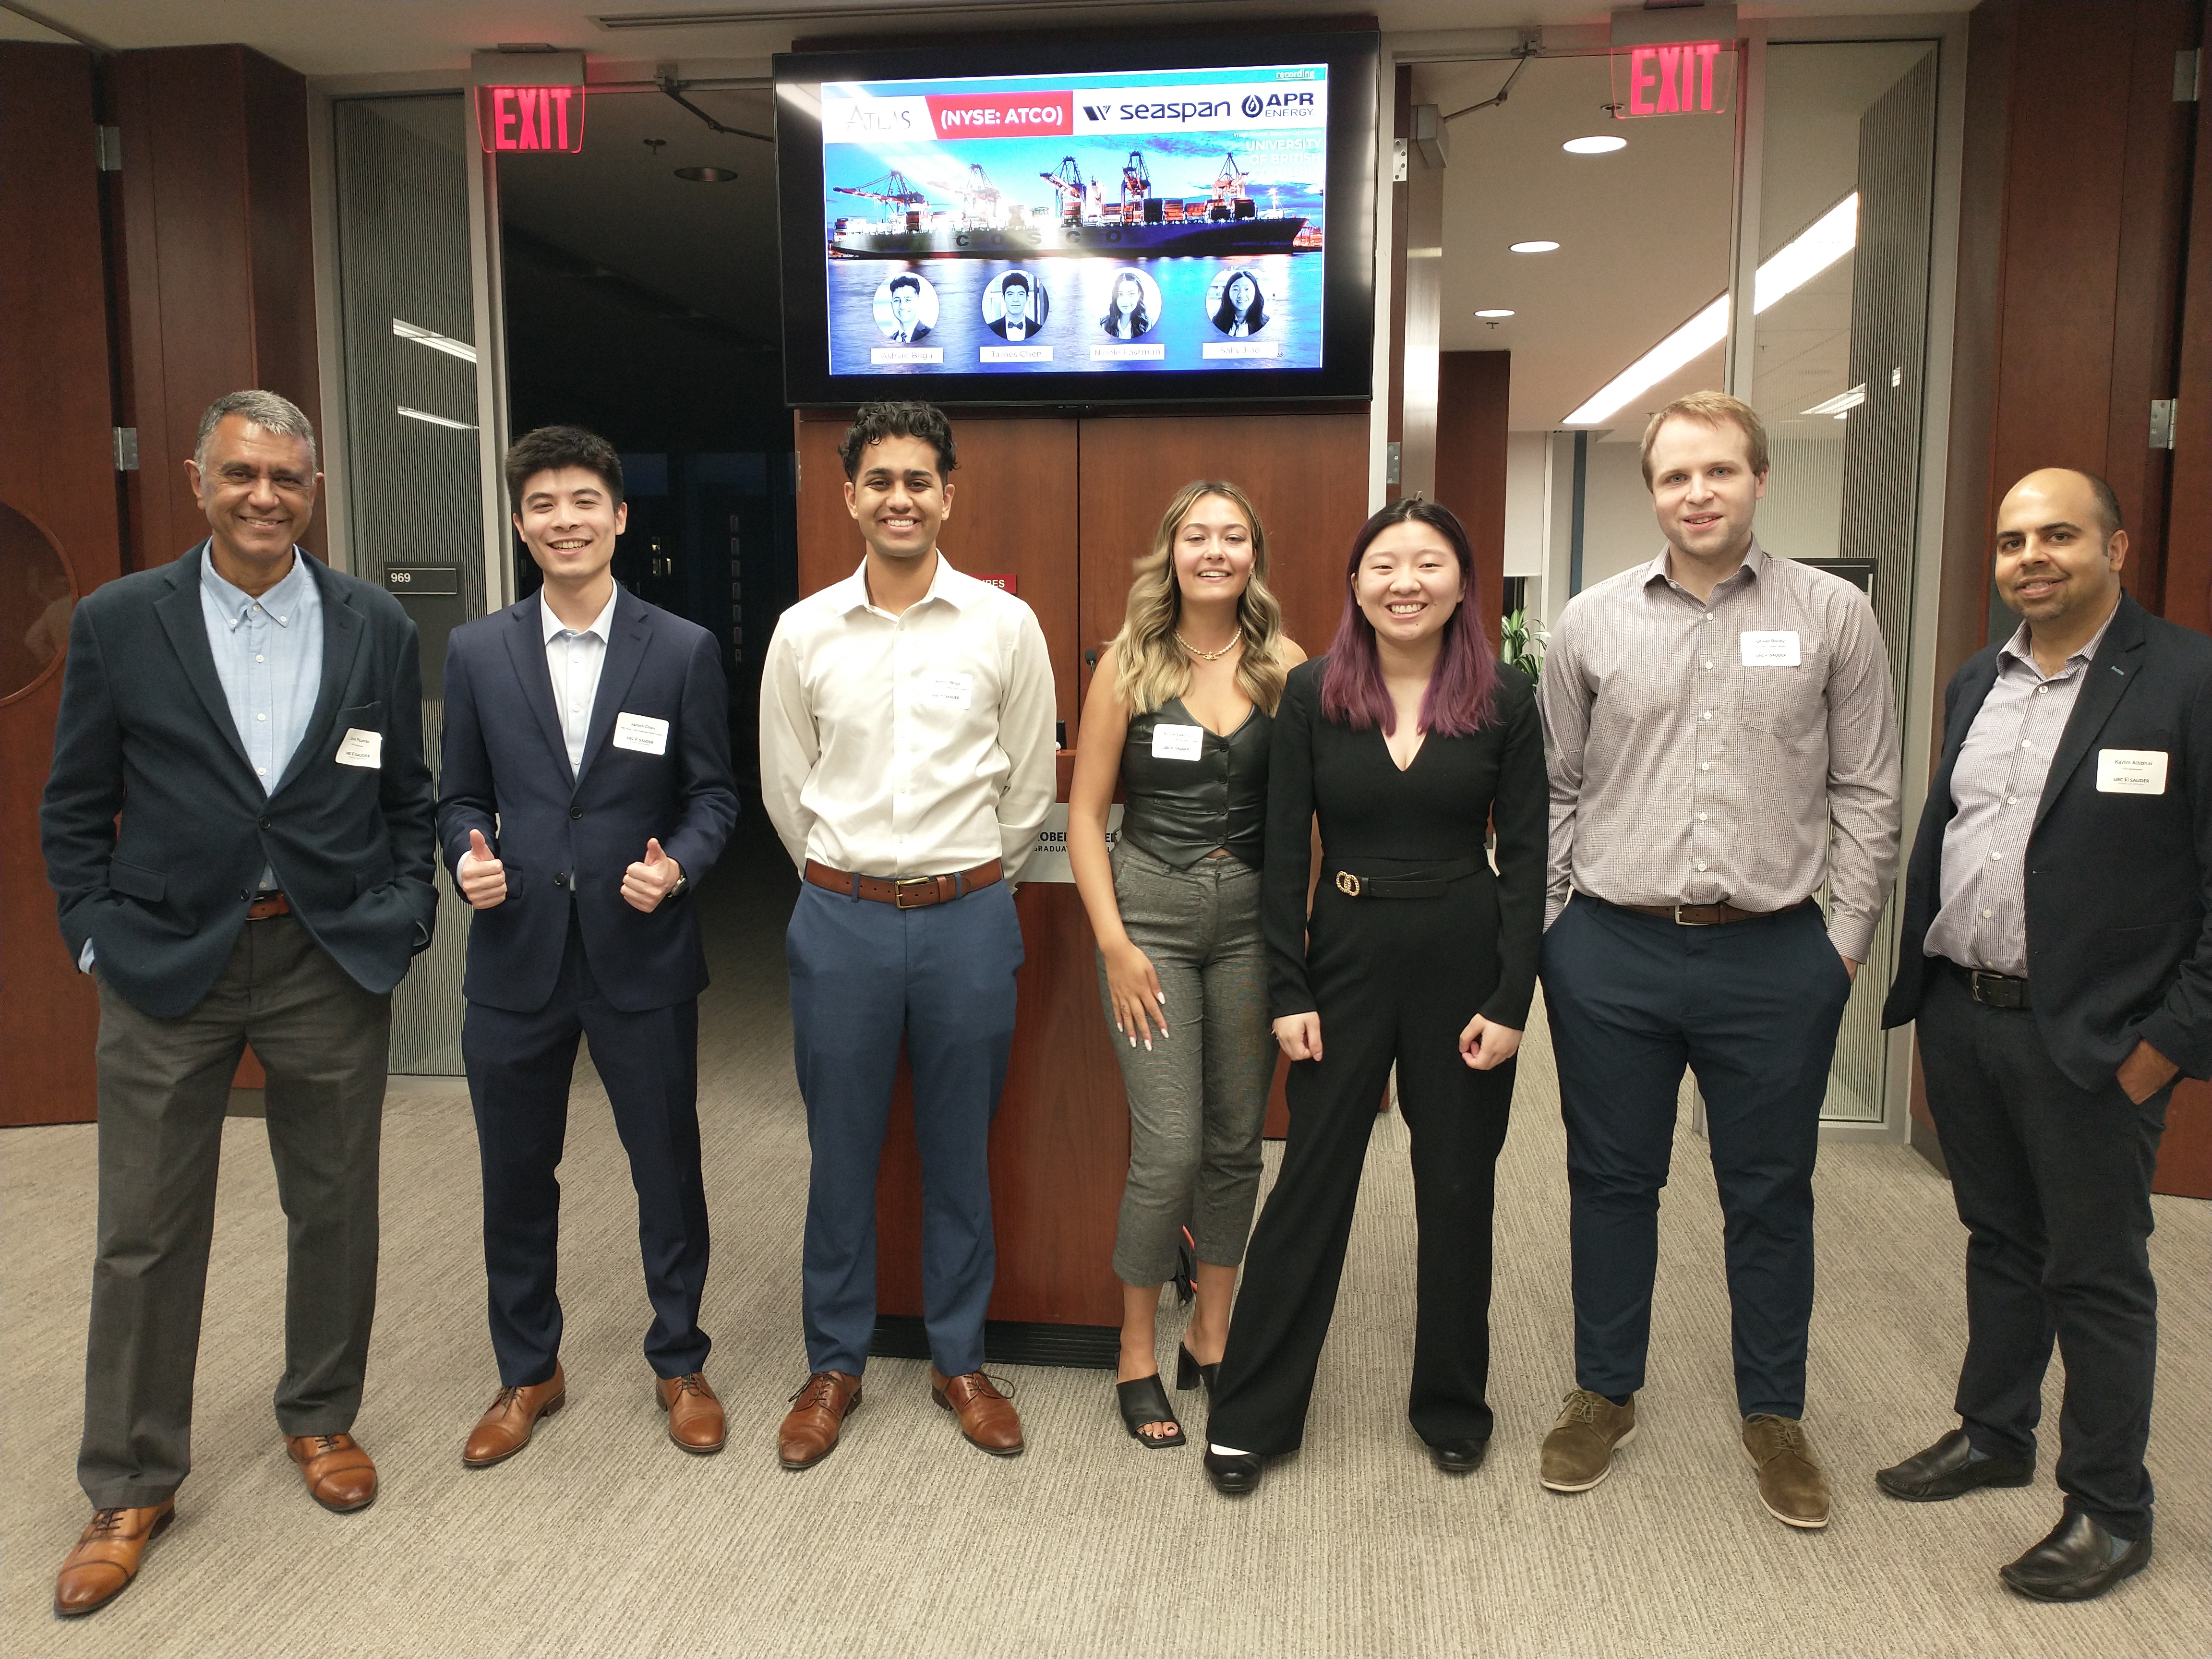 Event attendees (pictured left to right): Elvis Picardo (CFA Society Vancouver), James Chen, Ashvin Bilga, Nicole Eastman, Sally Jiao, Oliver Bailey, and Karim Allibhai (CFA Society Vancouver).